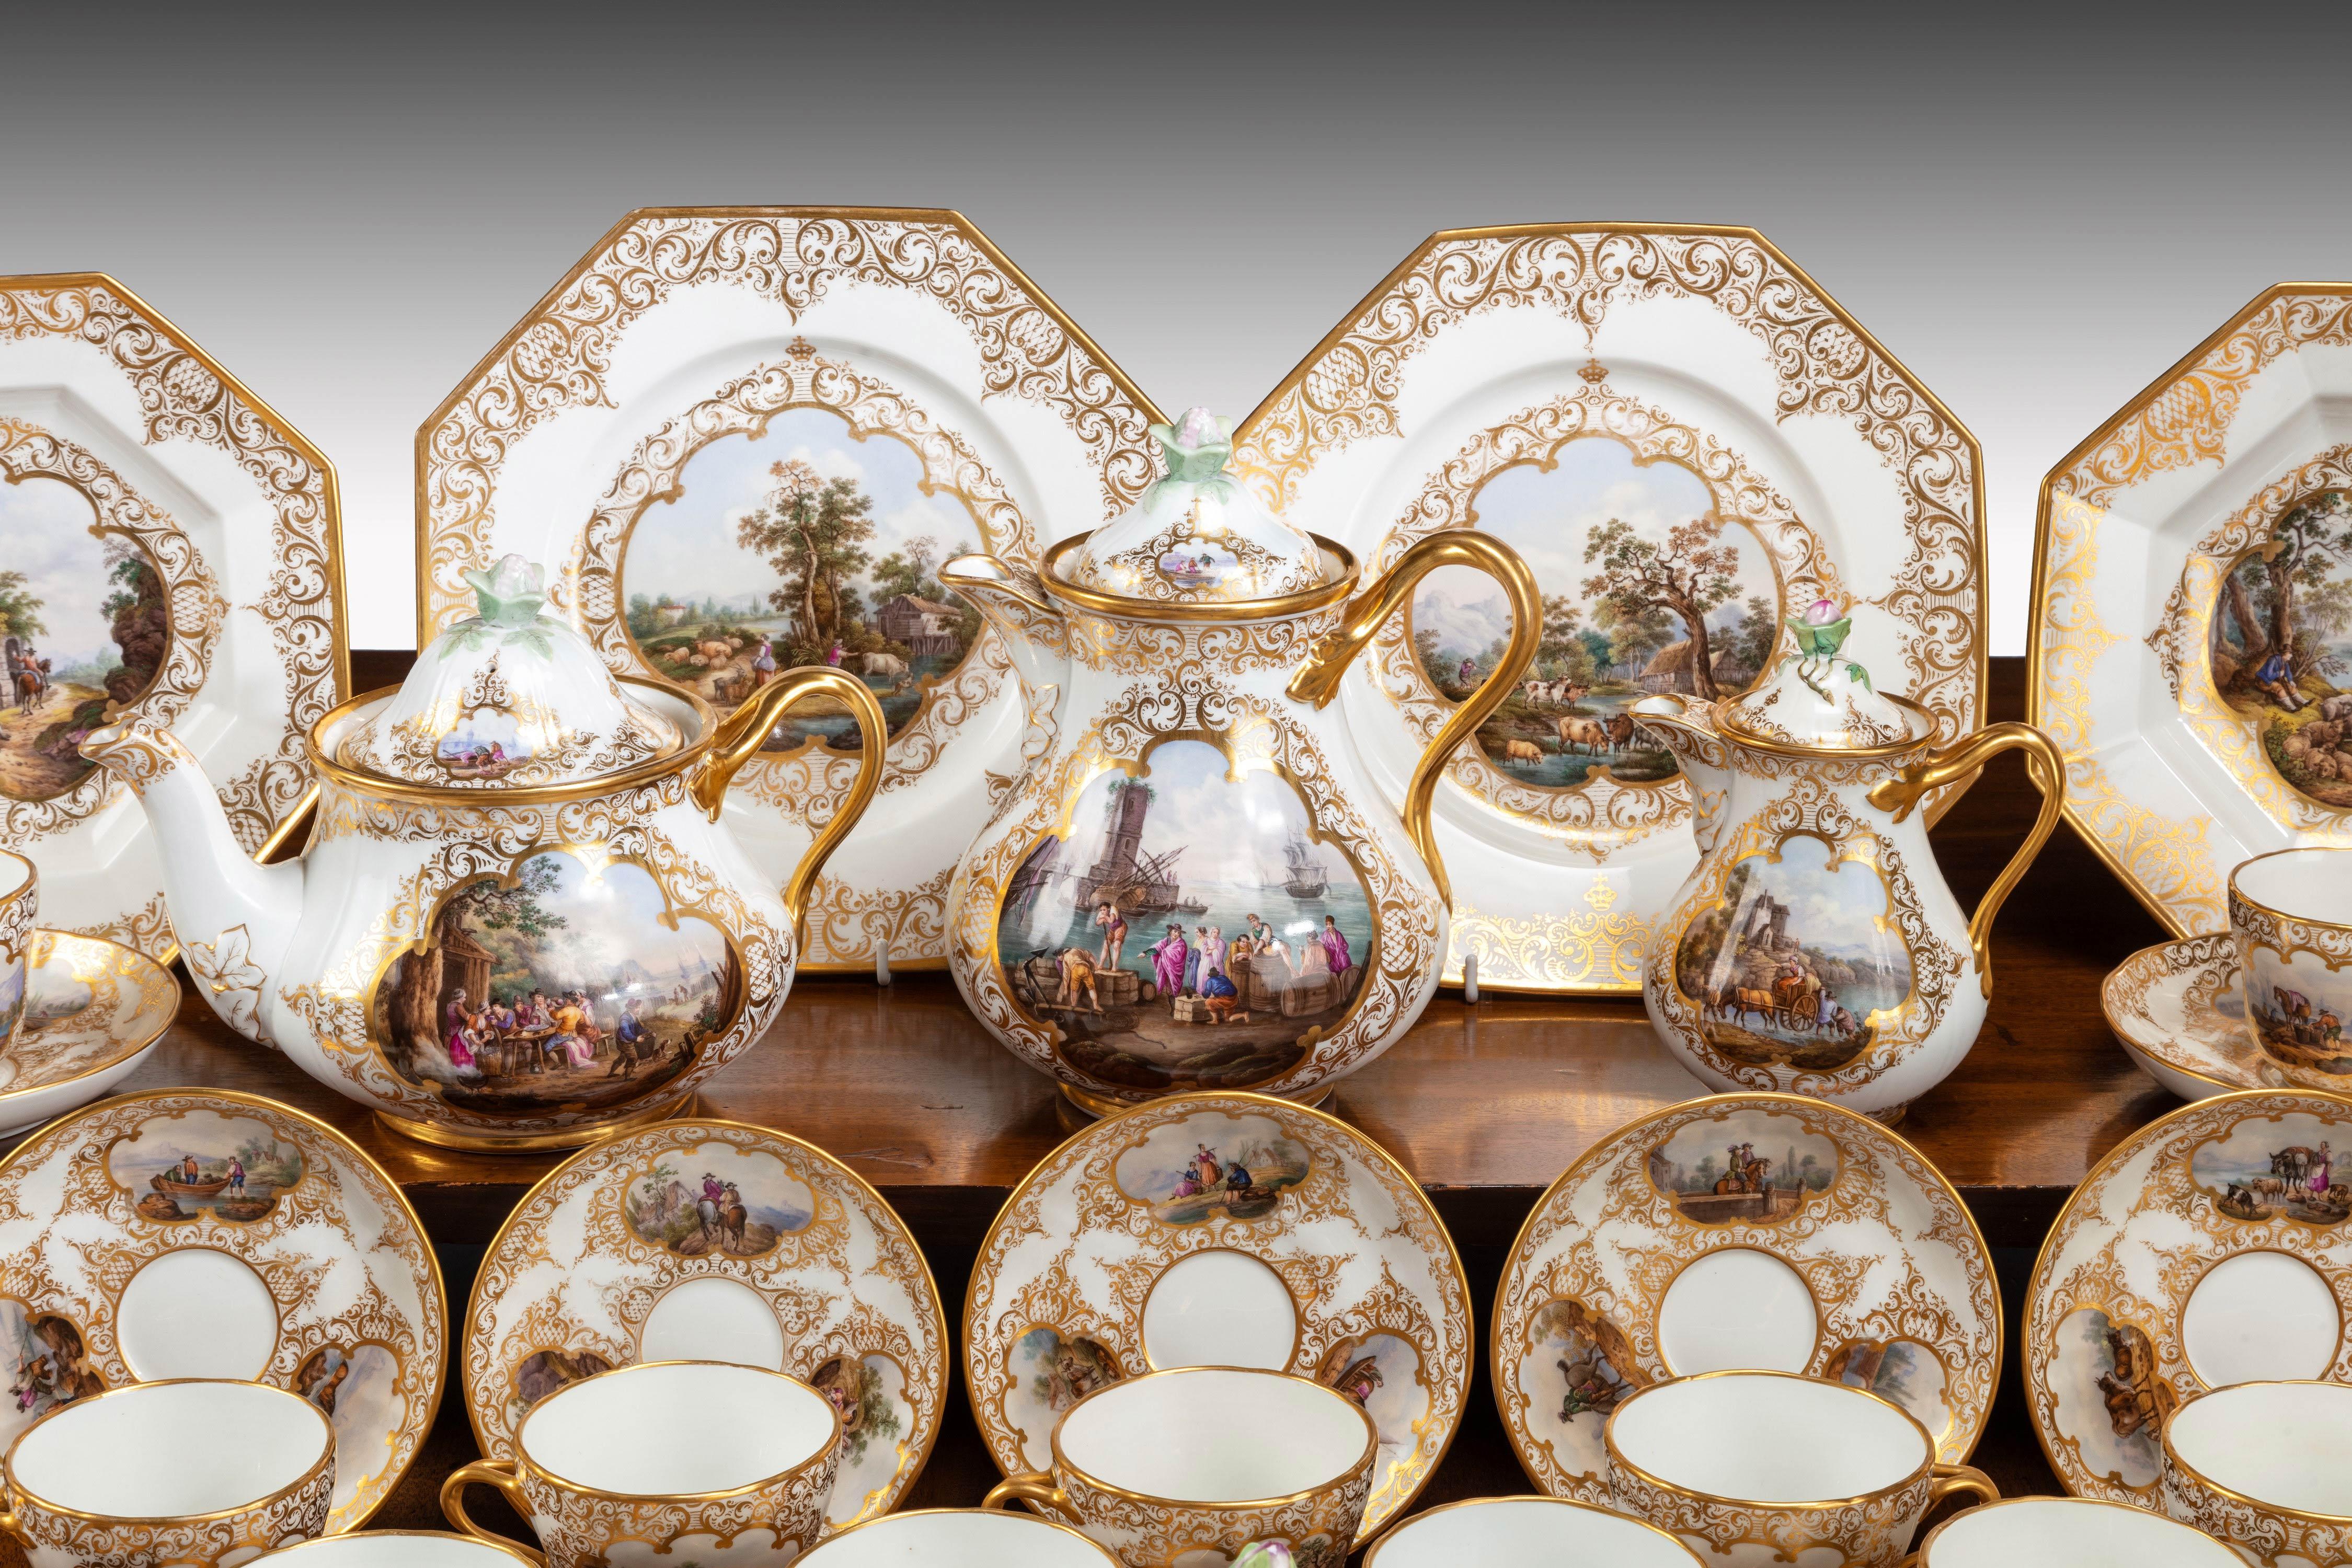 German KPM porcelain coffee and tea service decorated in colors and gold with scenic images in each cartouche, Berlin, 1849-1870. 50 pieces.
Comprising:
One coffee pot
One teapot
One milk pitcher
One sugar bowl
11 tea cups and saucers
Ten coffee